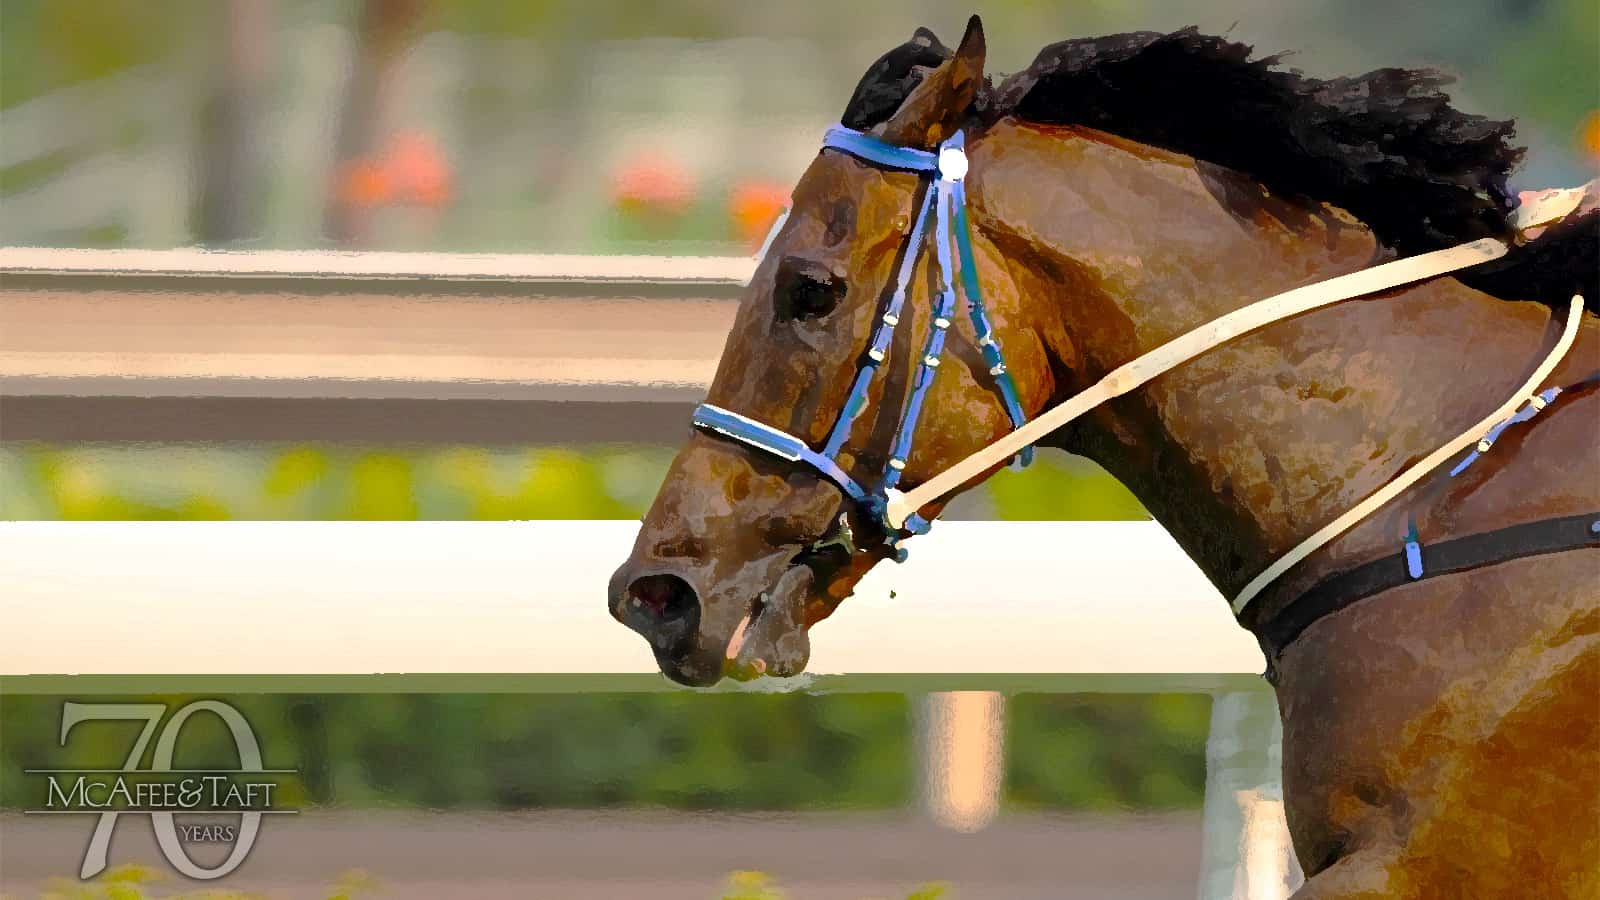 Close-up image of thoroughbred horse racing